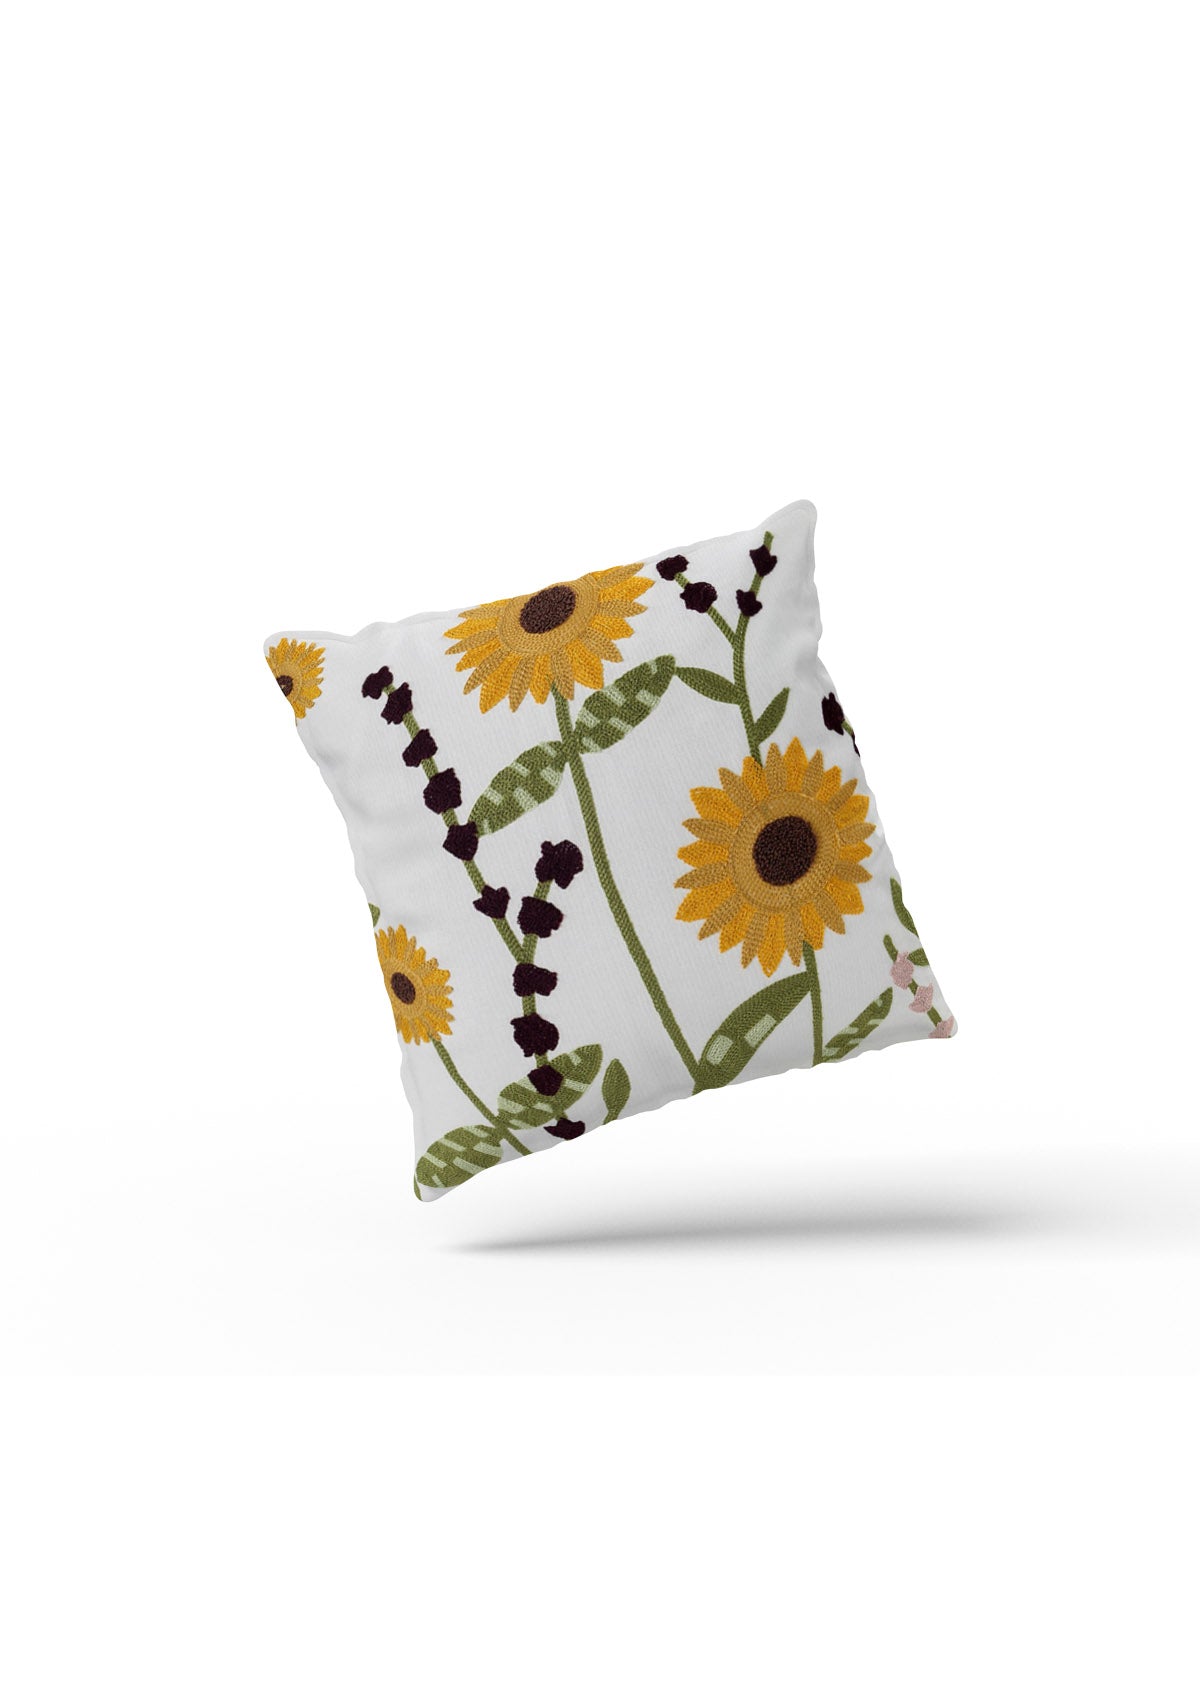 Cheerful sunflower design on a cushion cover, adding warmth and beauty to your home decor